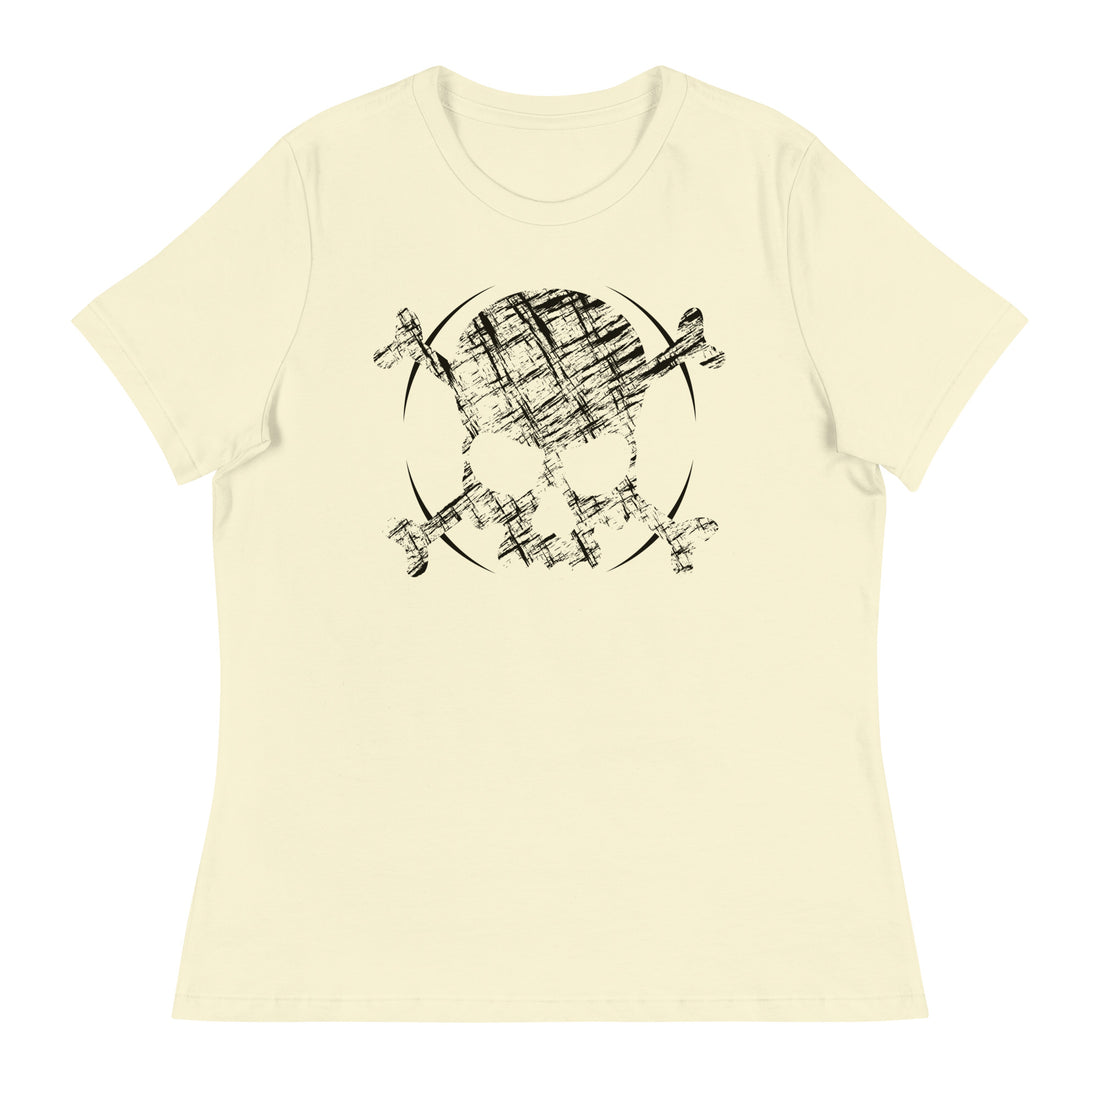 SKETCH SKULL Women's Relaxed Fit T-Shirt